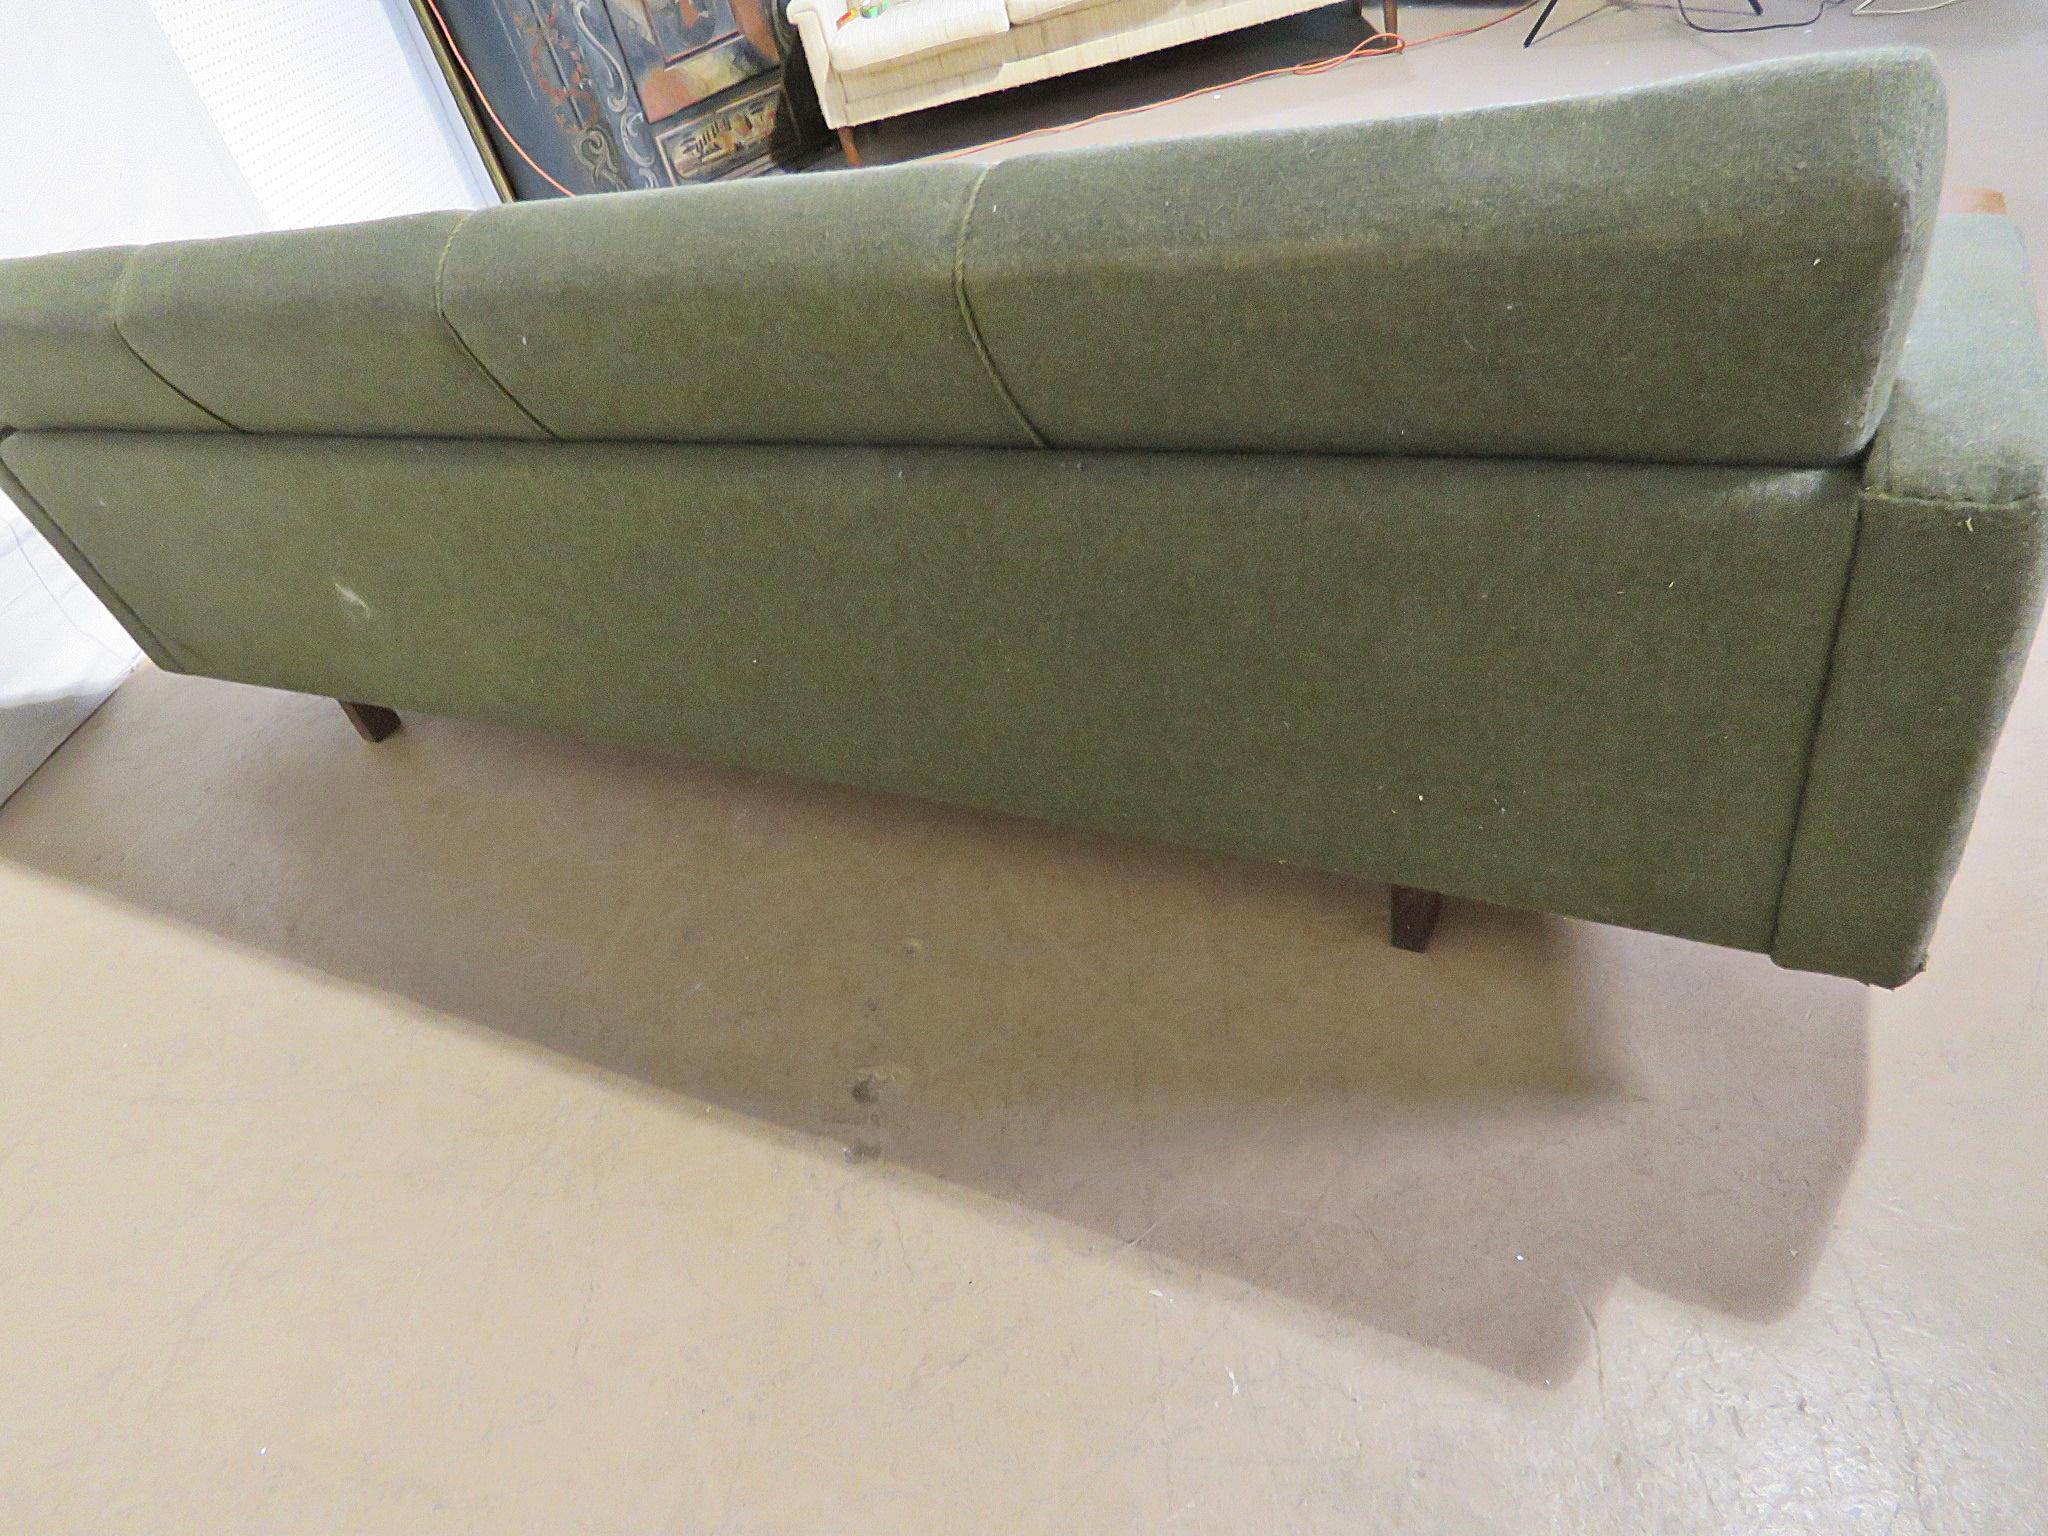 Vintage Mid-Century Modern sofa with piping to the upholstery.